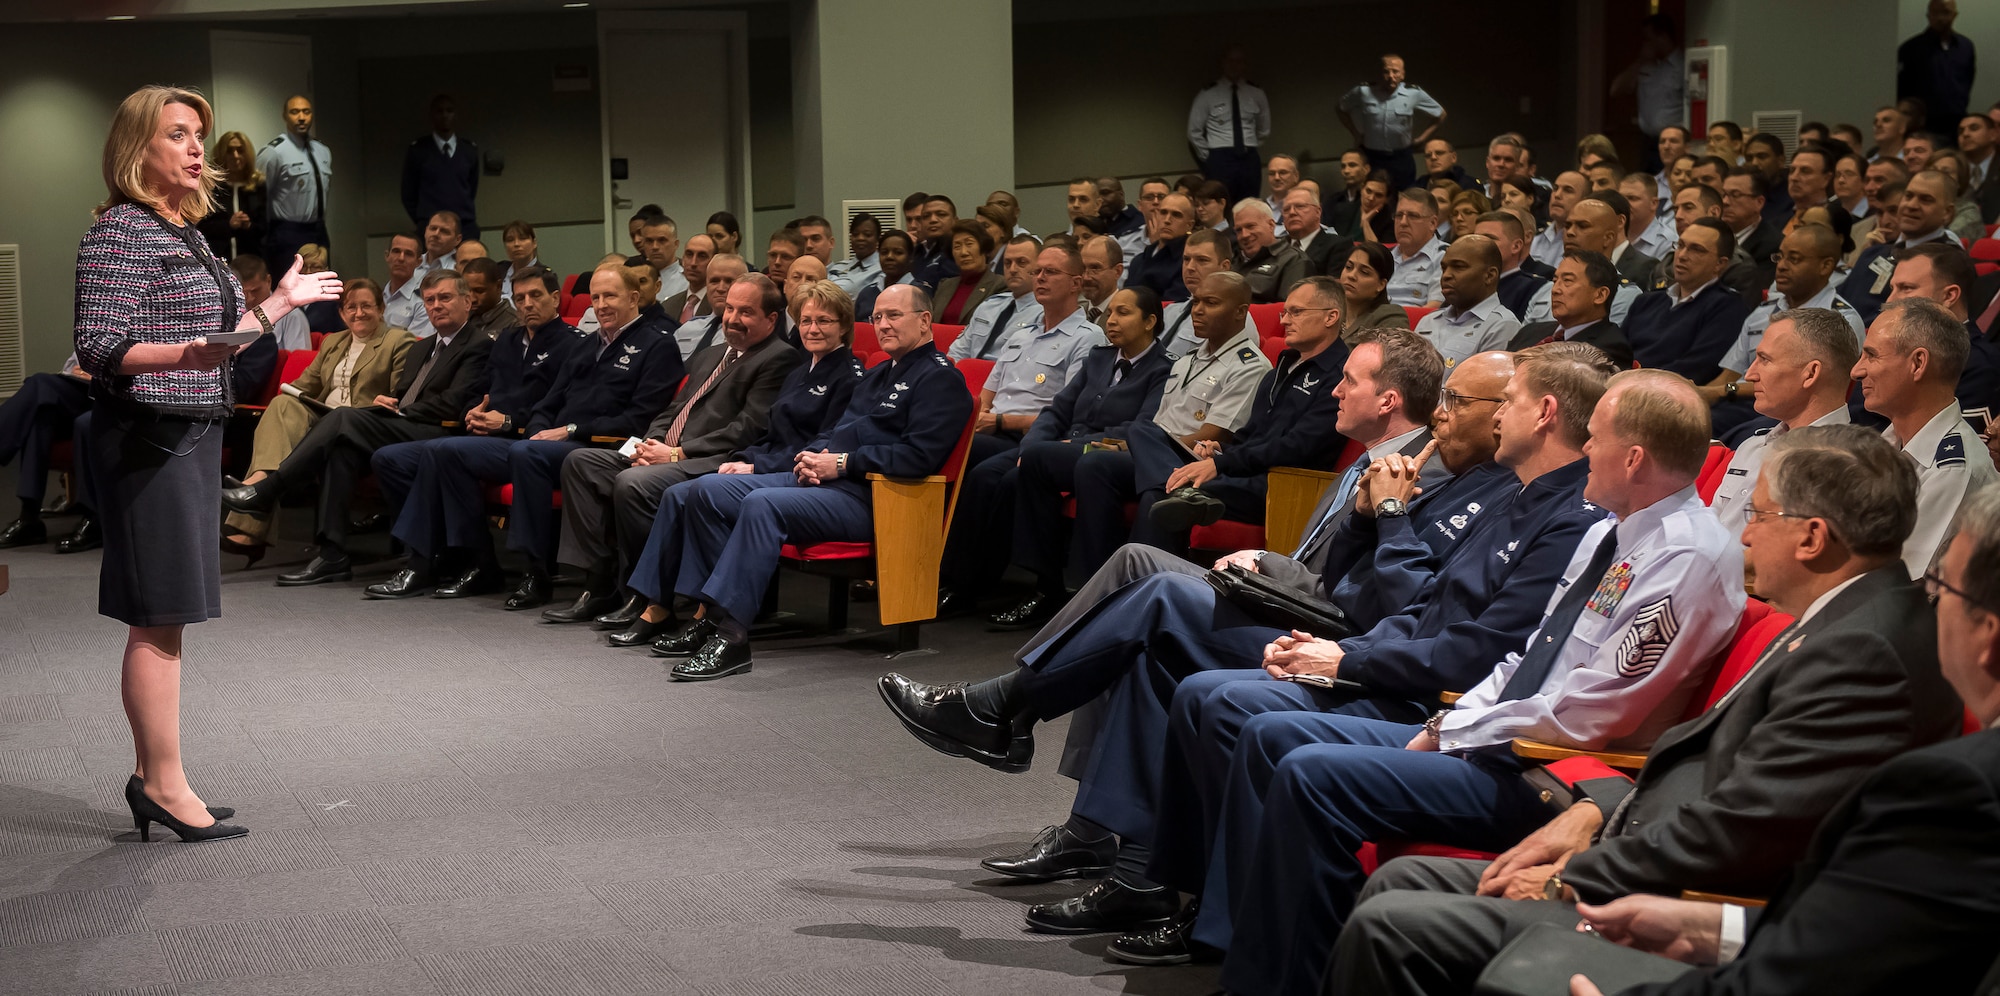 Secretary of the Air Force Deborah Lee James talks to a gathering of uniformed and civilian Airmen during her first town hall meeting Jan. 9, 2014, in the Pentagon auditorium, Washington, D.C. During her address, James spoke about her 32 years of defense experience, passing on the lessons she’s learned, and encouraging Airmen to view challenges as opportunities.  (U.S. Air Force photo/Jim Varhegyi)